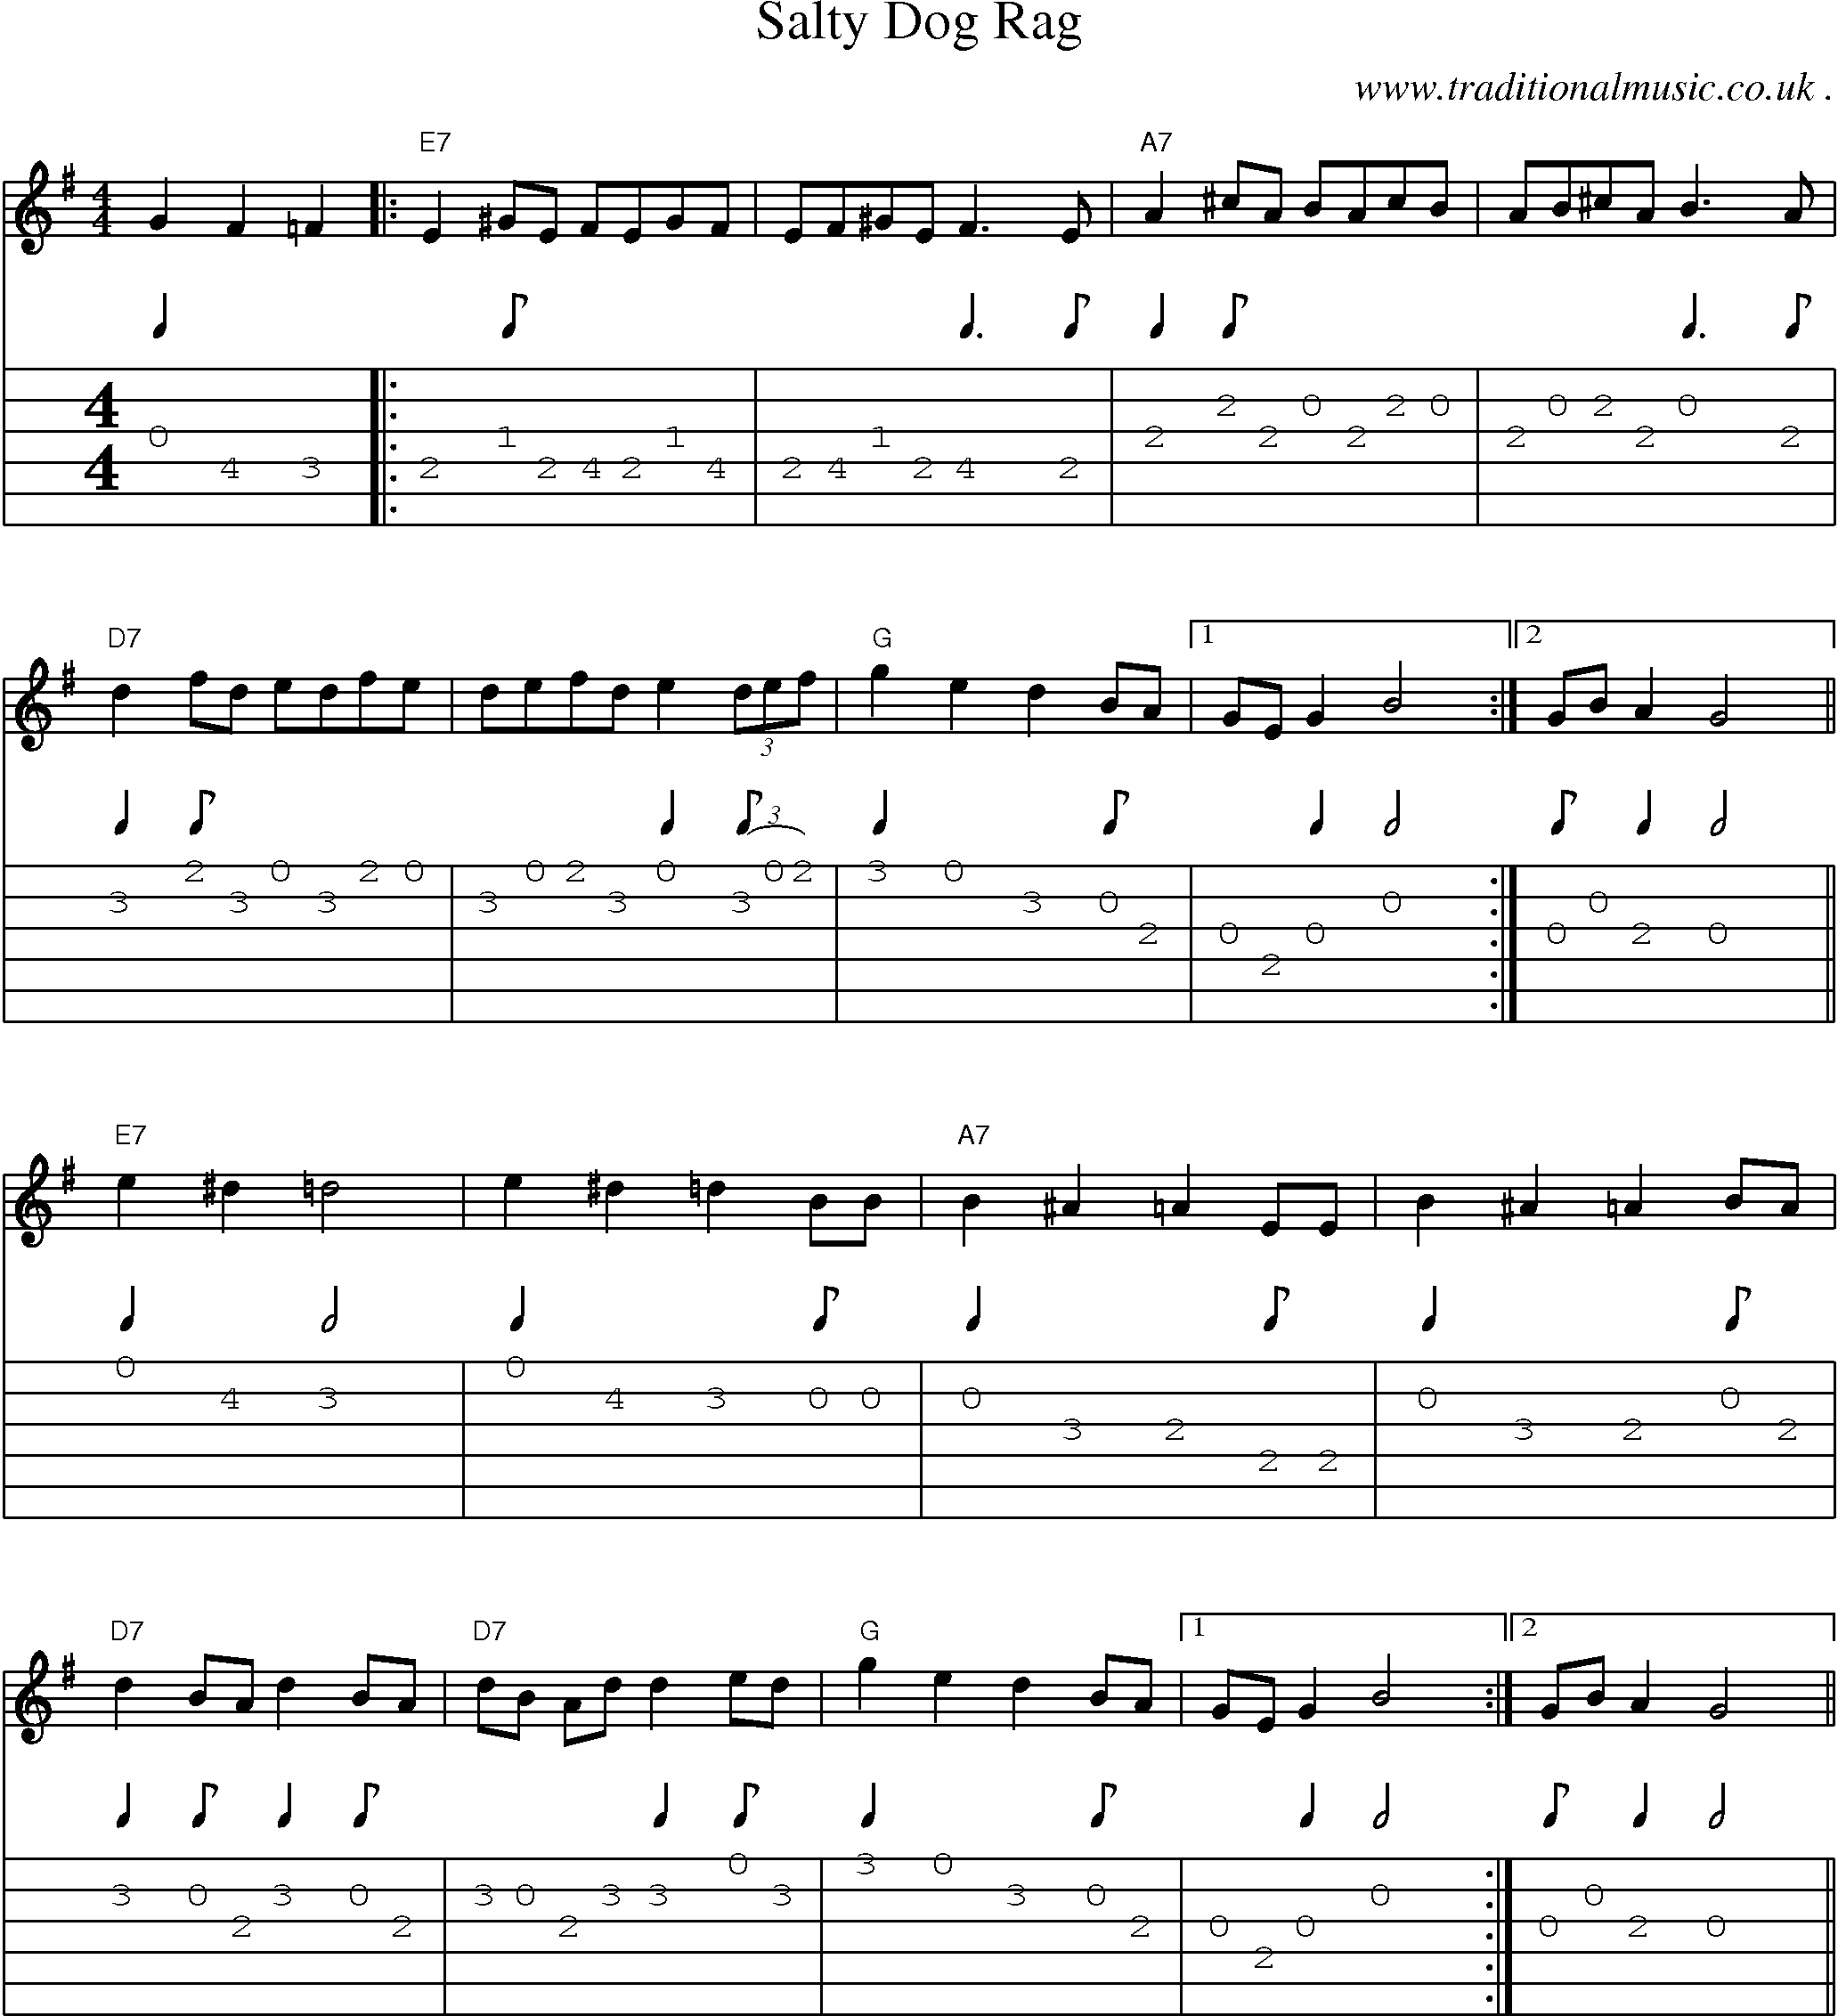 Music Score and Guitar Tabs for Salty Dog Rag